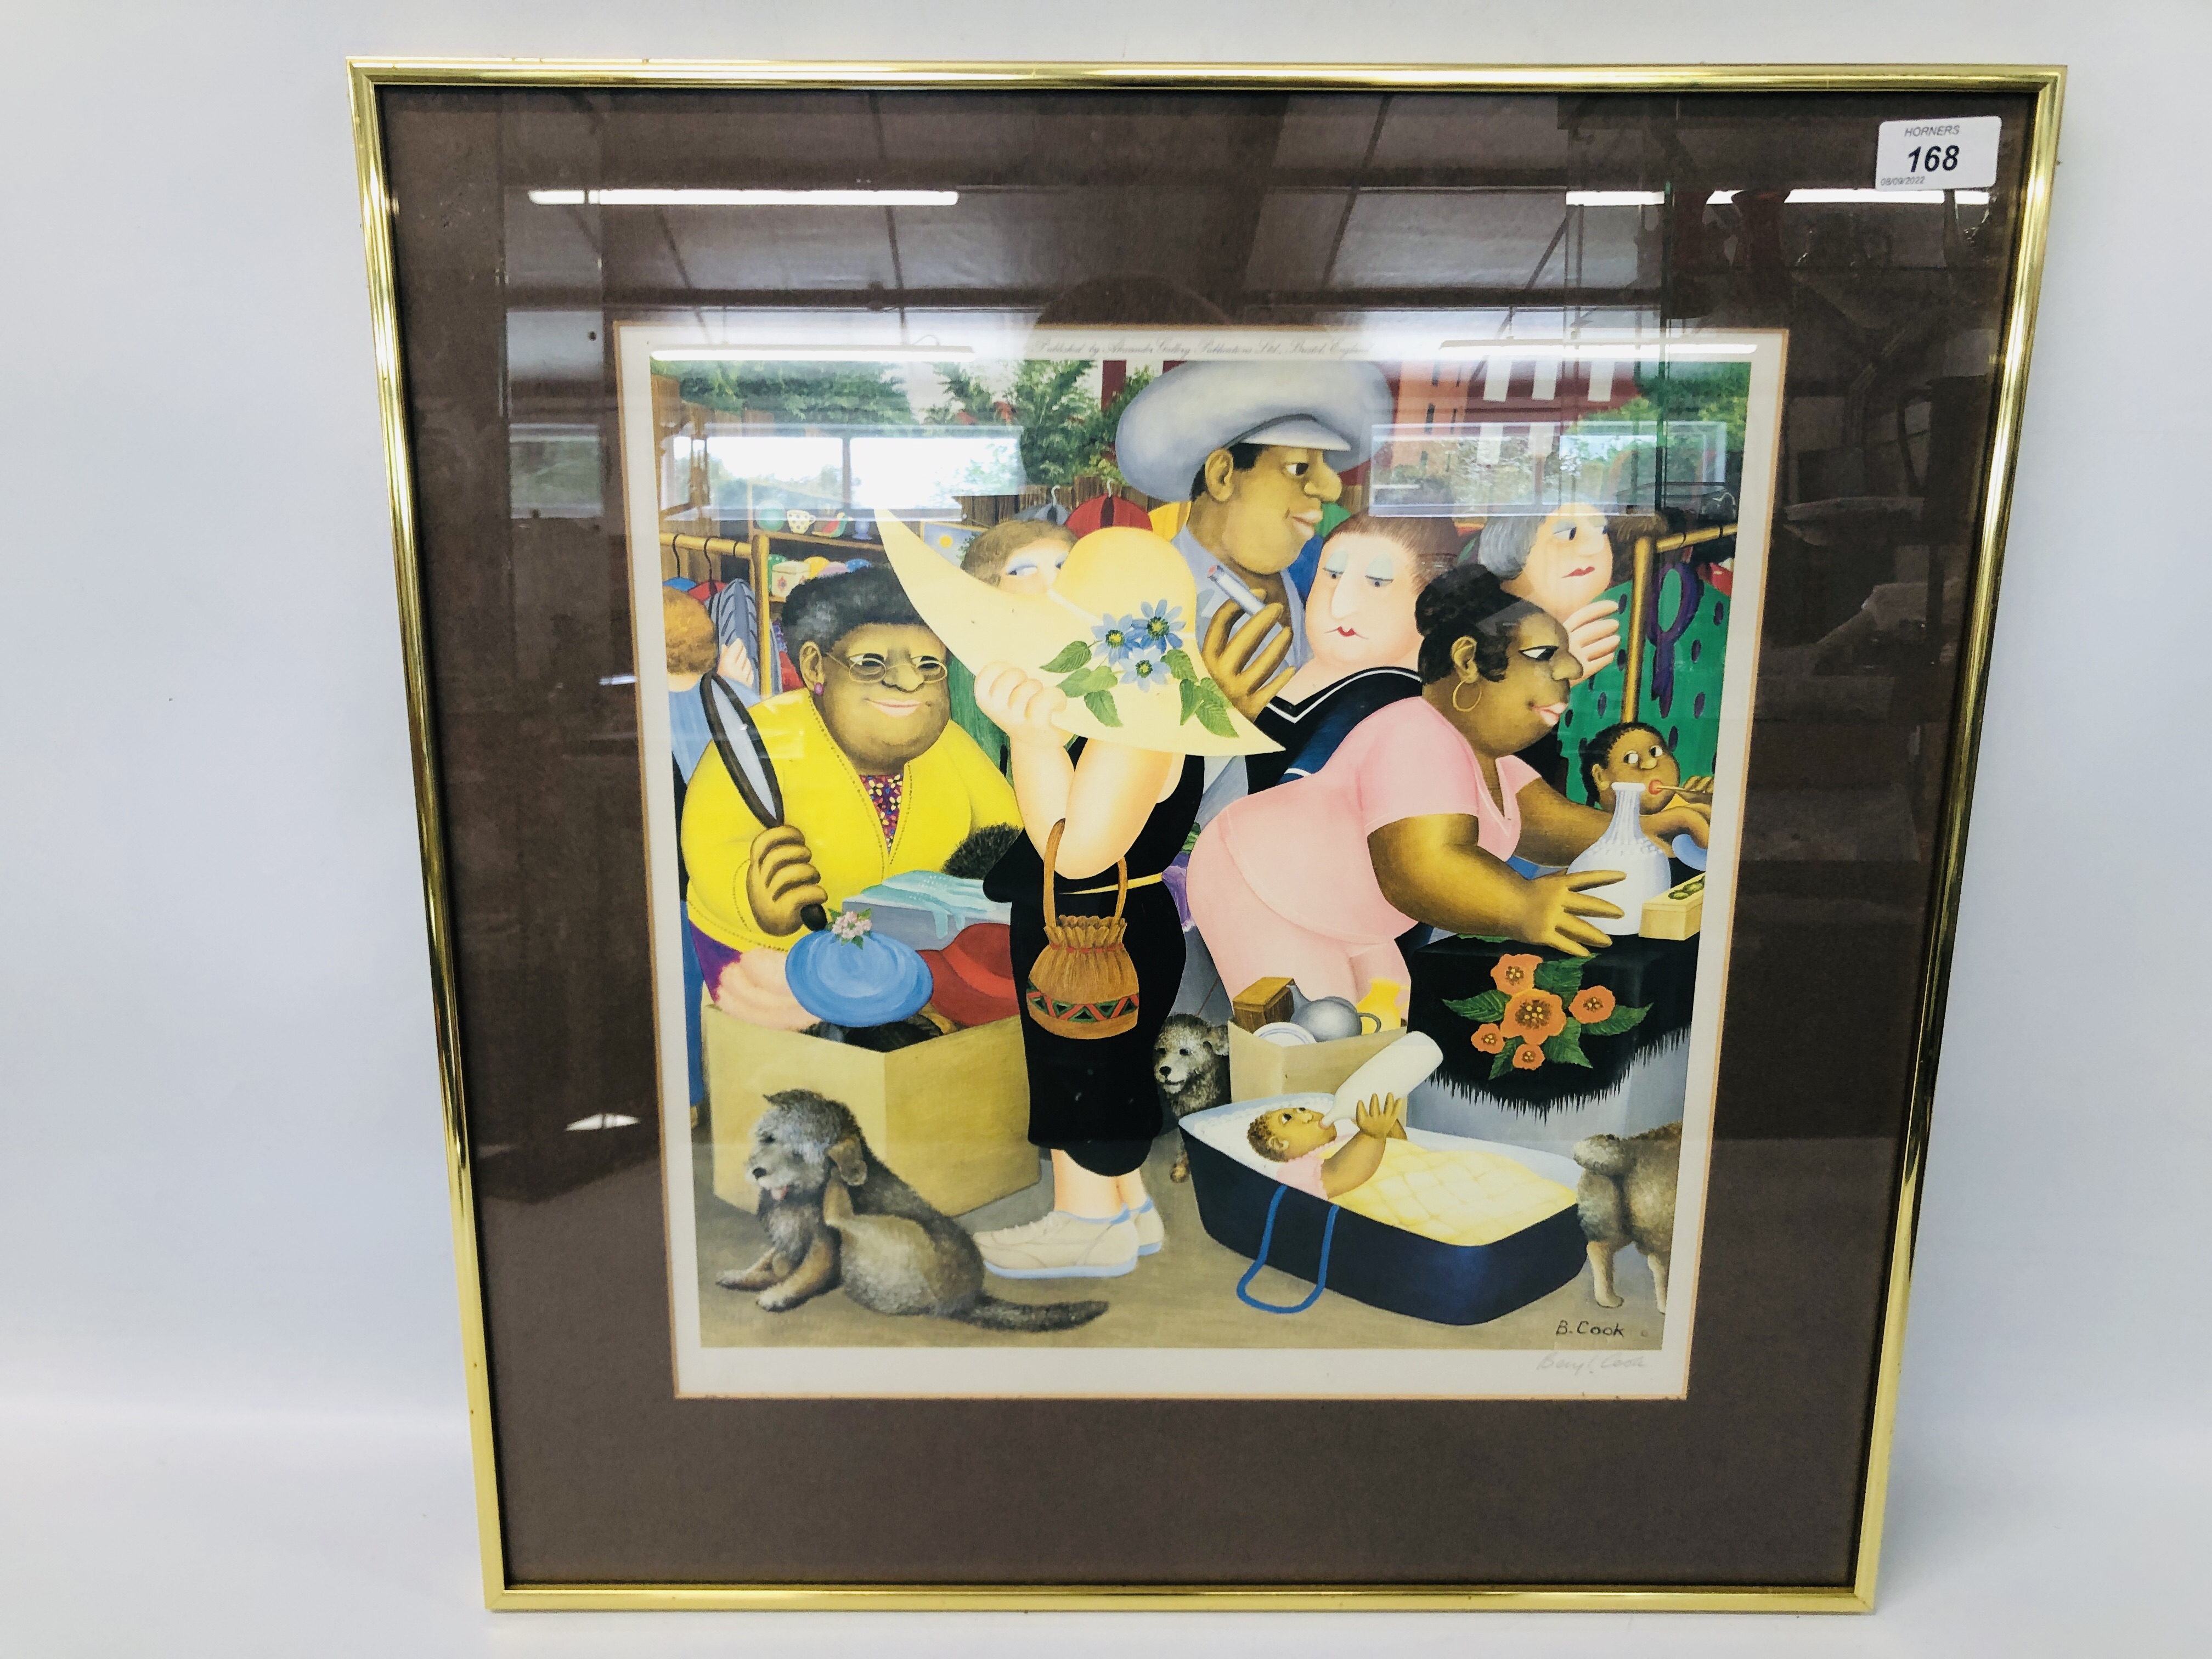 2 X BERYL COOK PRINTS TO INCLUDE A MARKET SCENE SIGNED IN MARGIN 40 X 40CM + A COUPLE DANCING 14. - Image 2 of 6